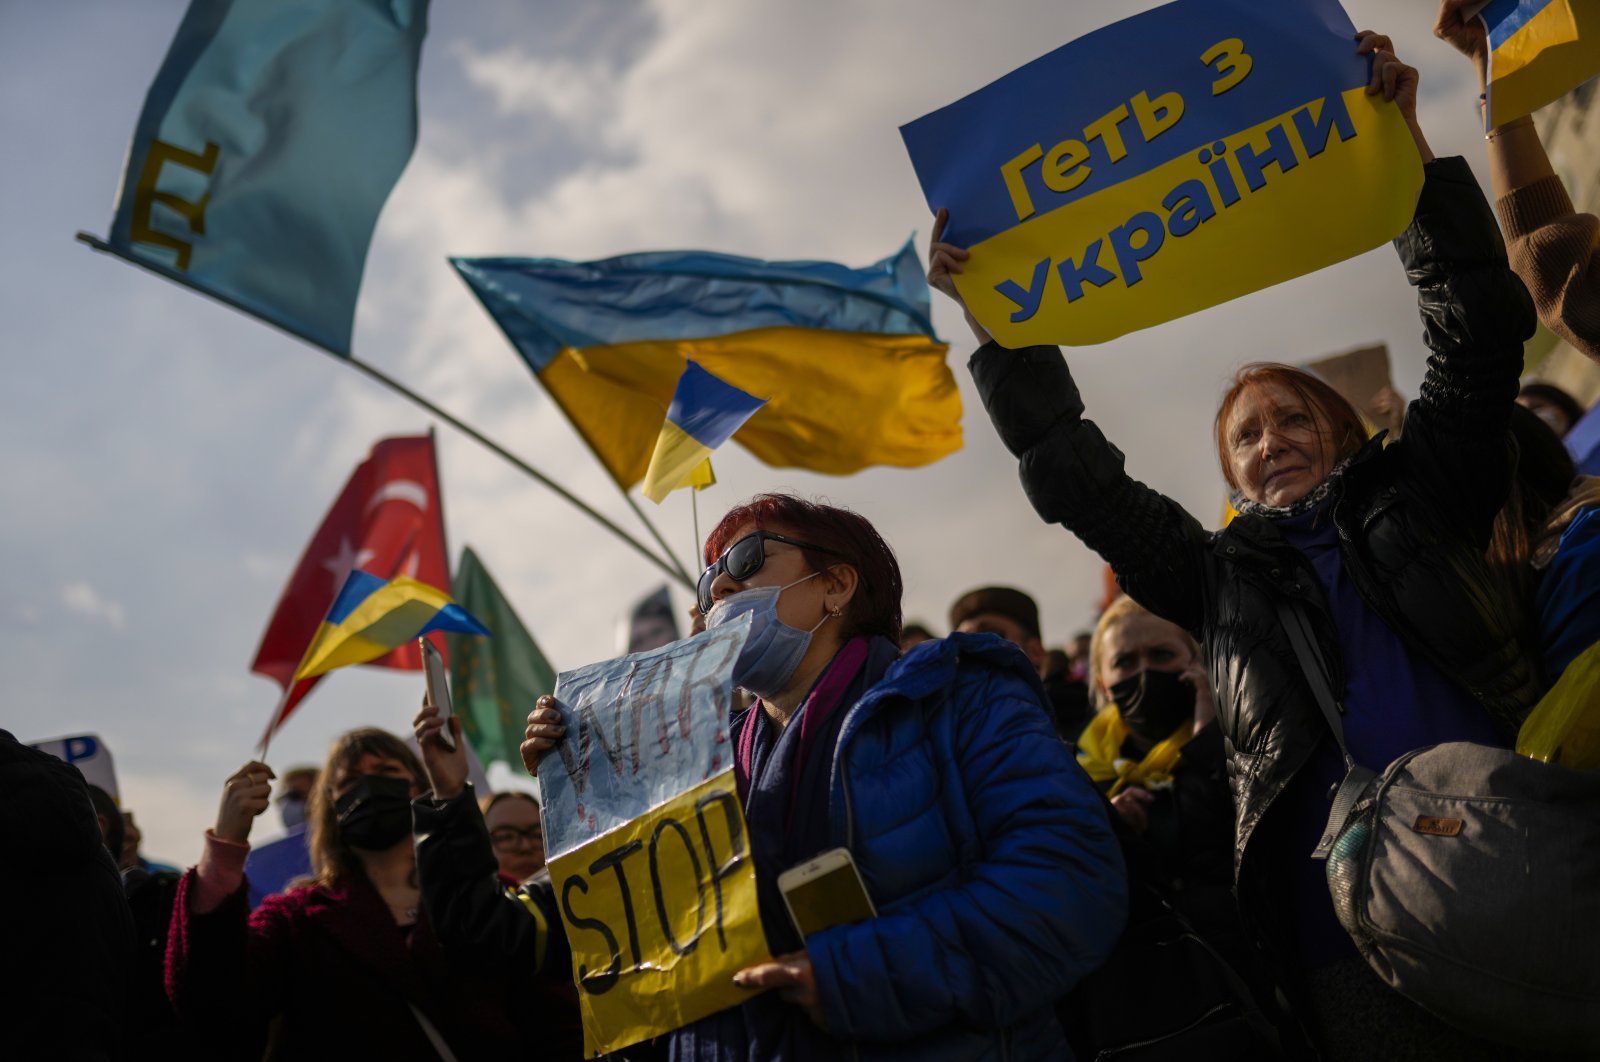 Pro-Ukrainian demonstrators hold banners and Ukrainian flags as they shout slogans during a protest in Istanbul, Turkey, Saturday, Feb. 26, 2022. (AP Photo)